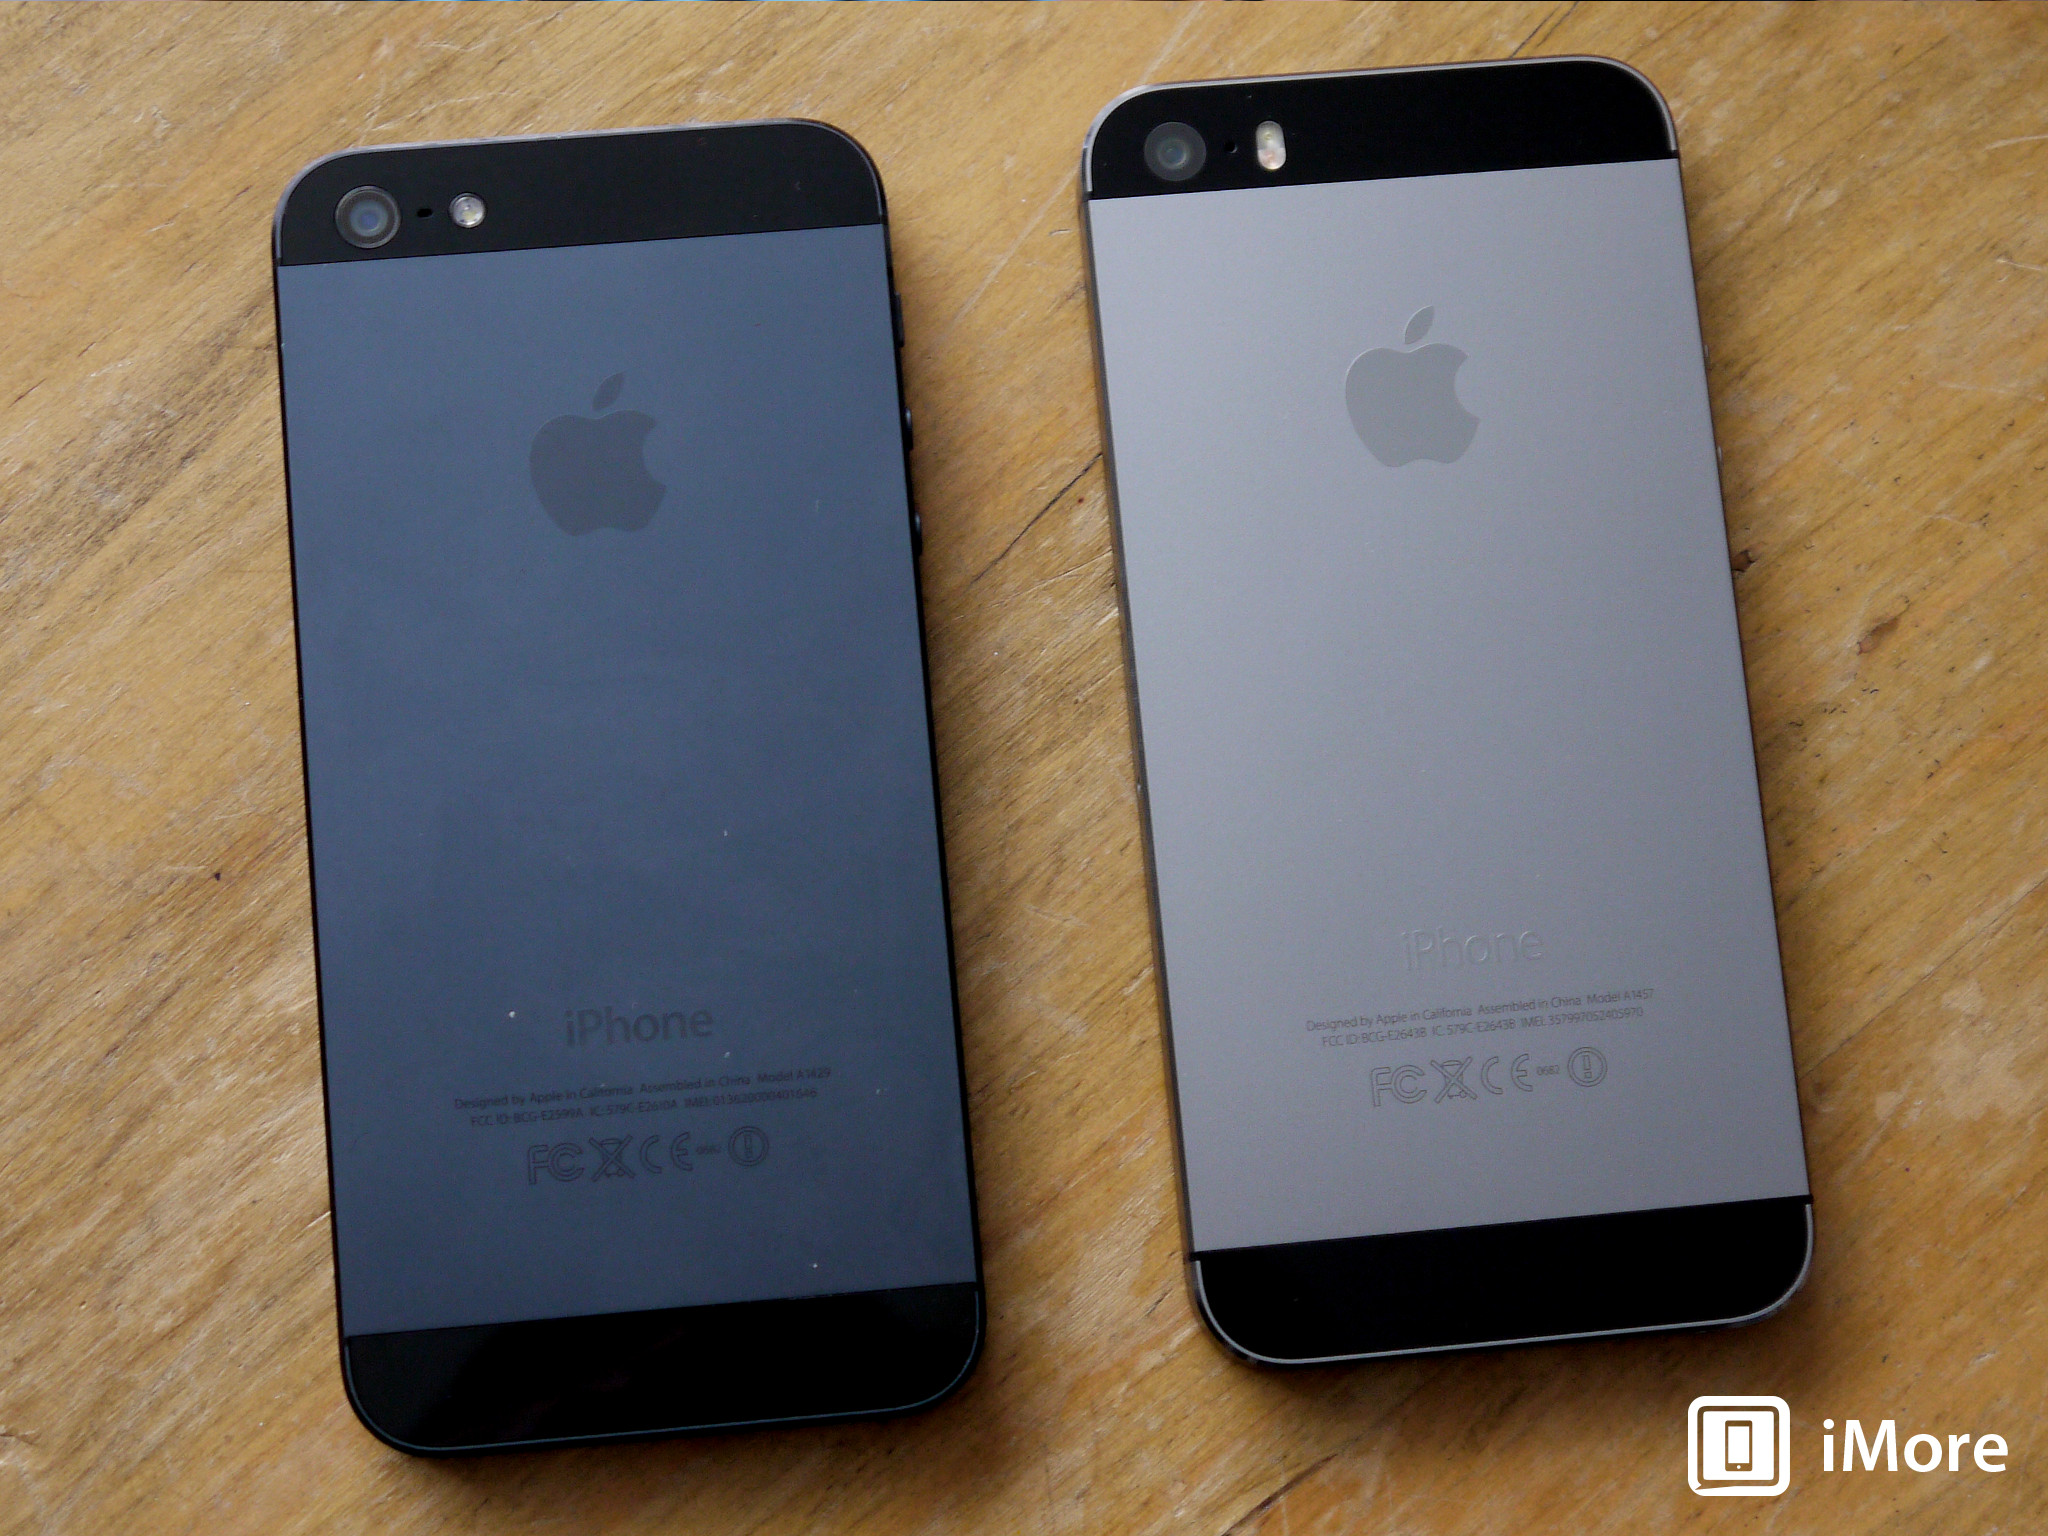 The difference between the Space Gray iPhone 5s and the black iPhone 5